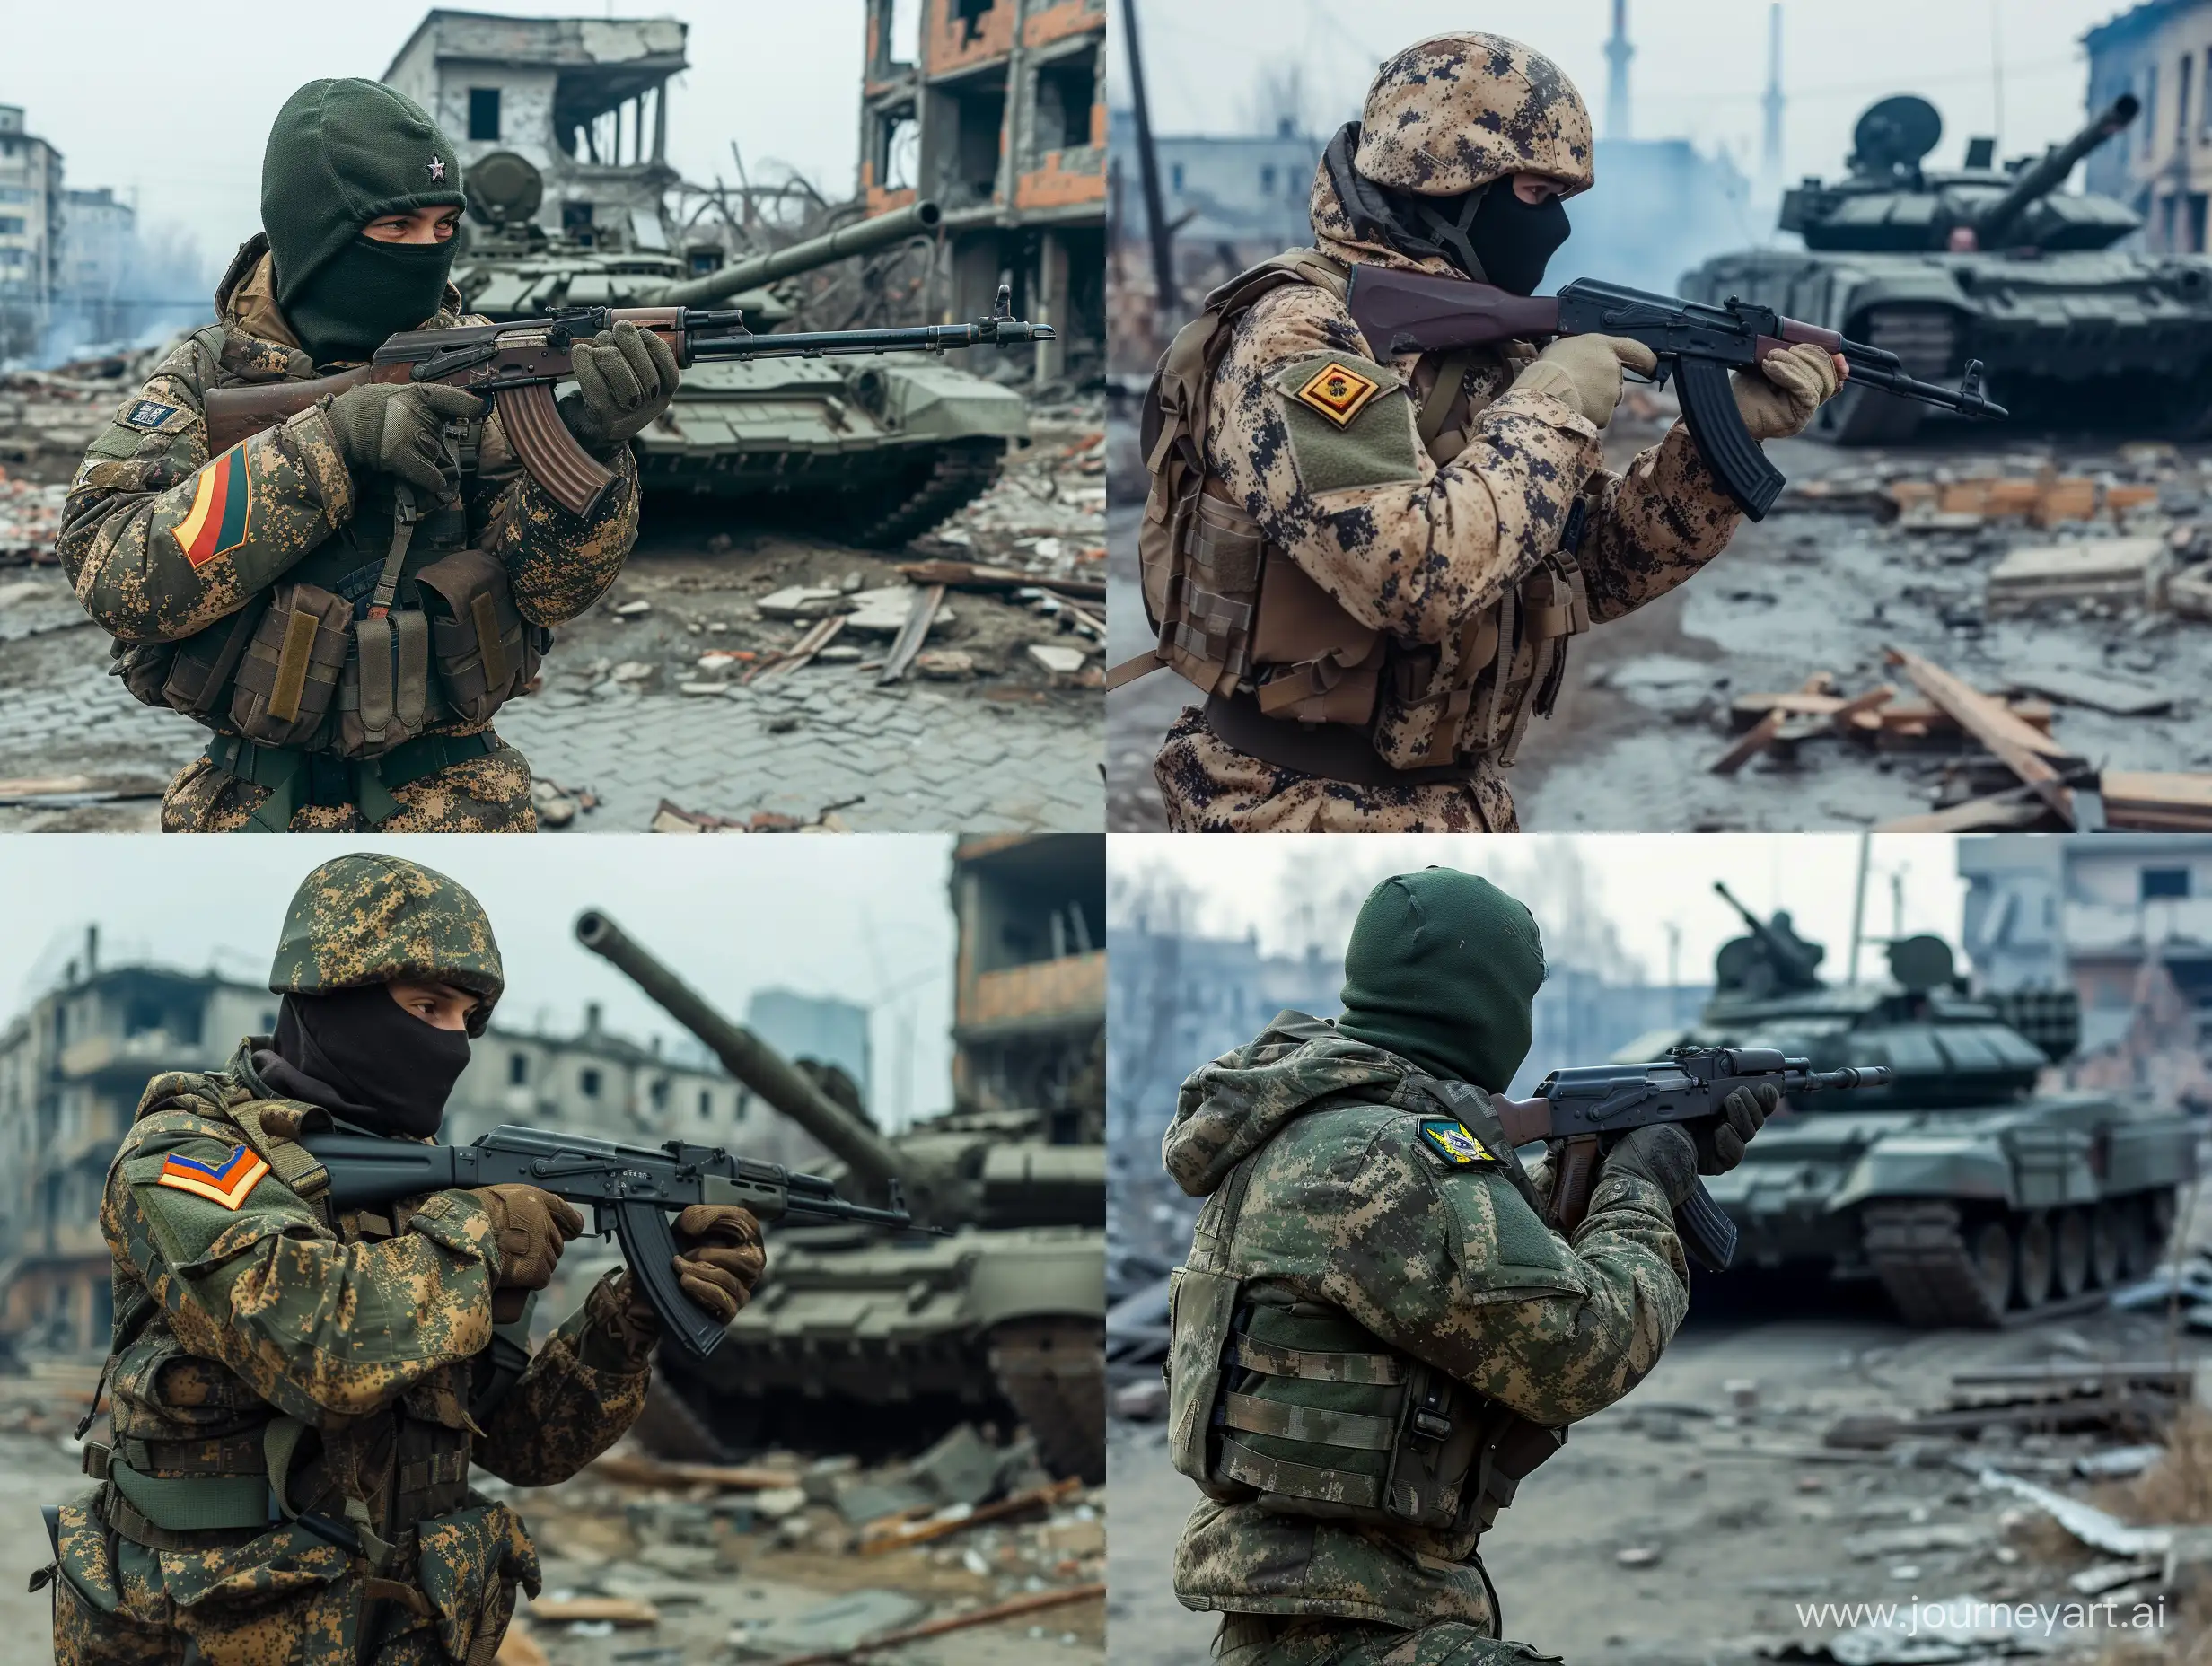 Russian-Soldier-on-Special-Military-Operation-in-Donbas-with-AK12-Rifle-and-T90-Tank